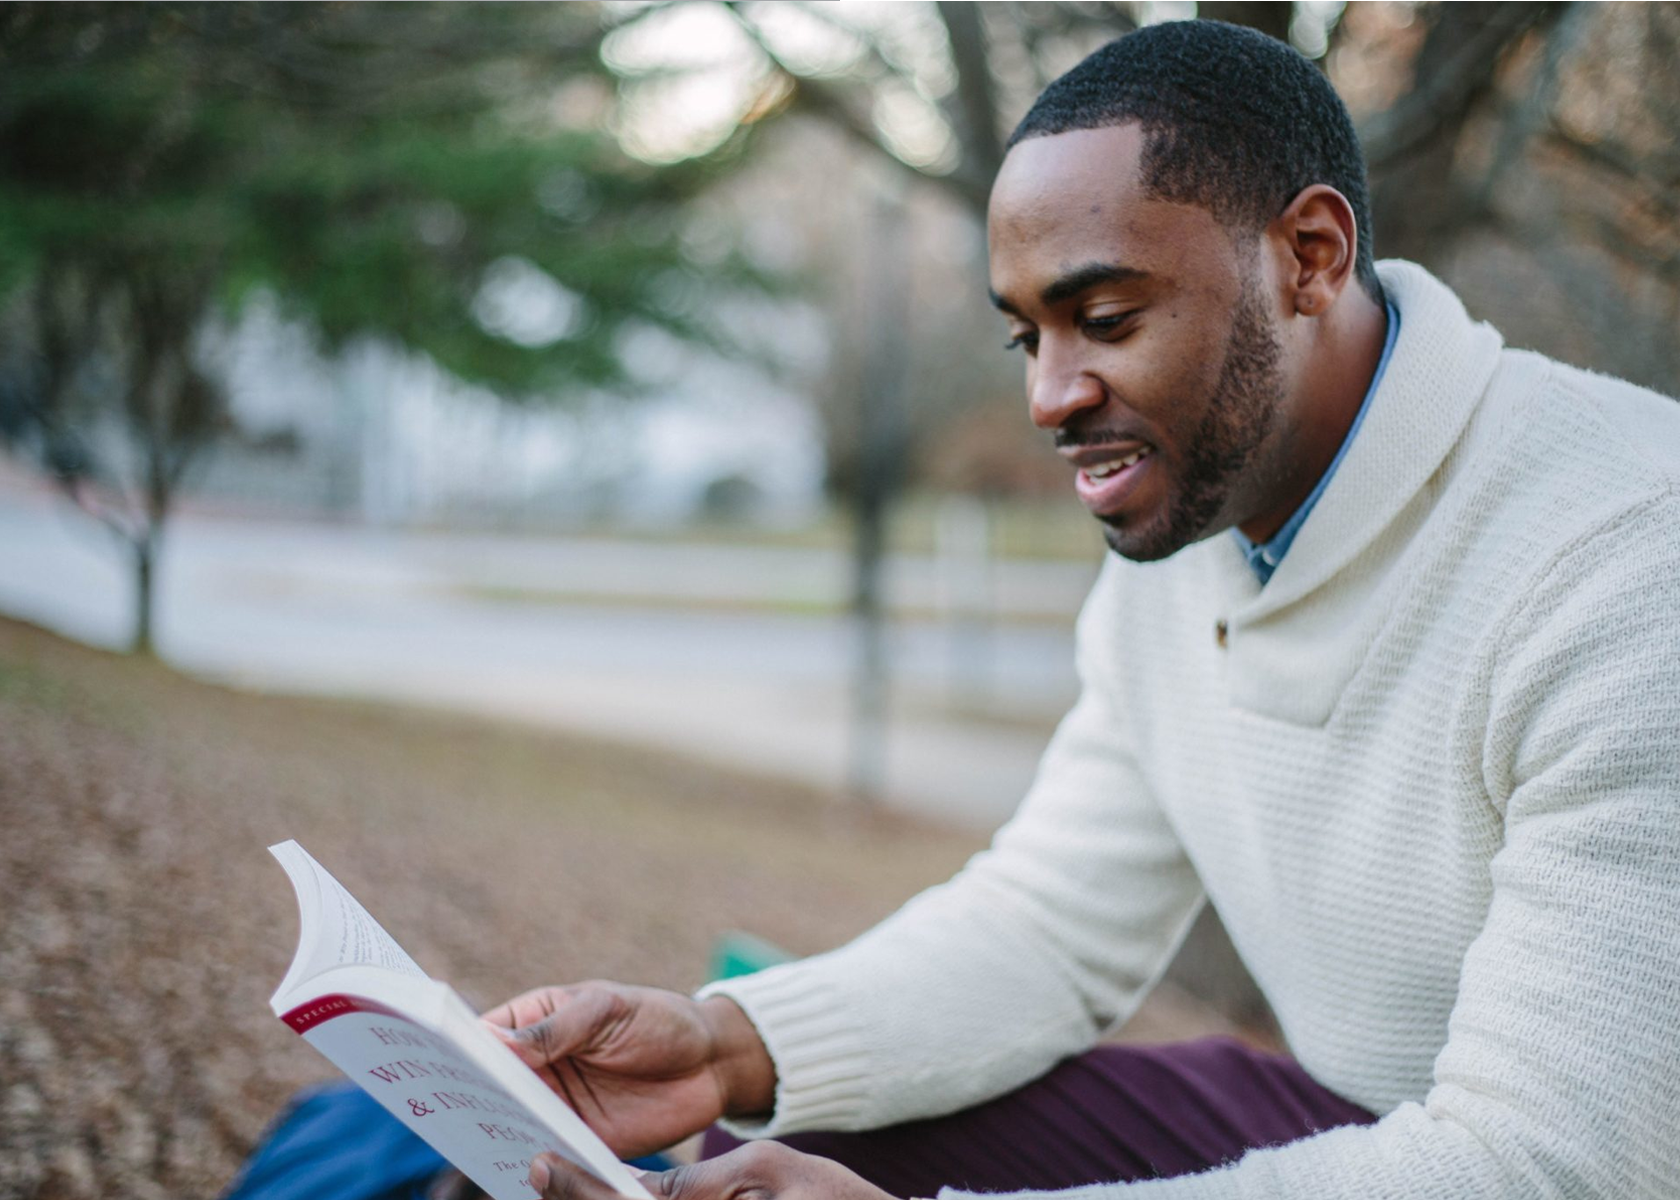 A man sits outside reading a book and smiling